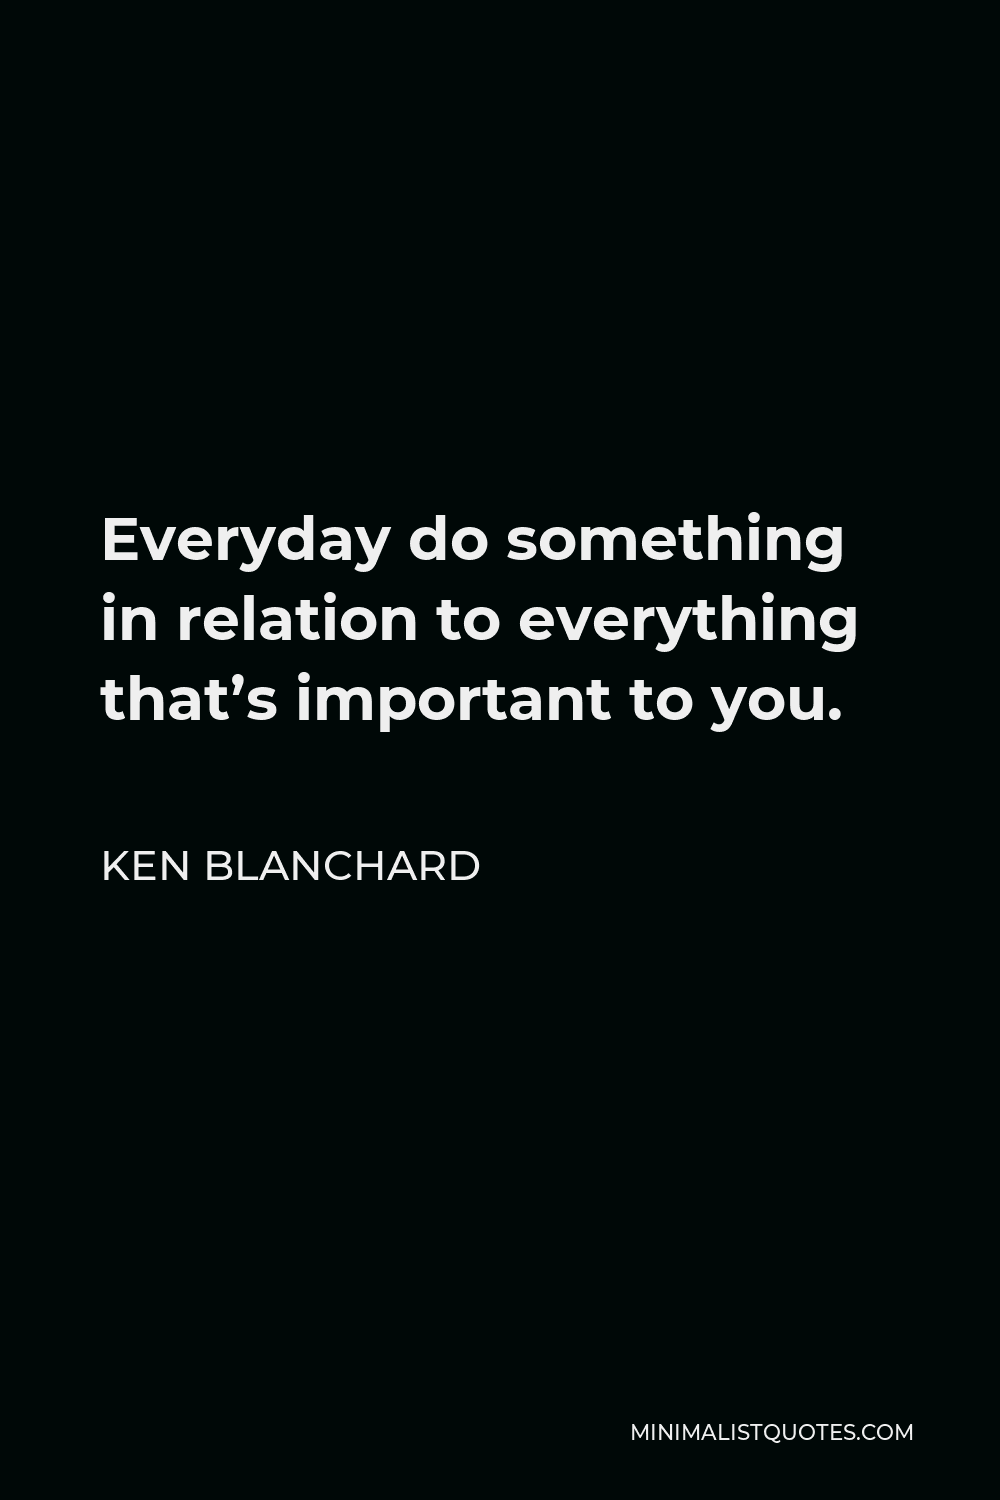 Ken Blanchard Quote - Everyday do something in relation to everything that’s important to you.